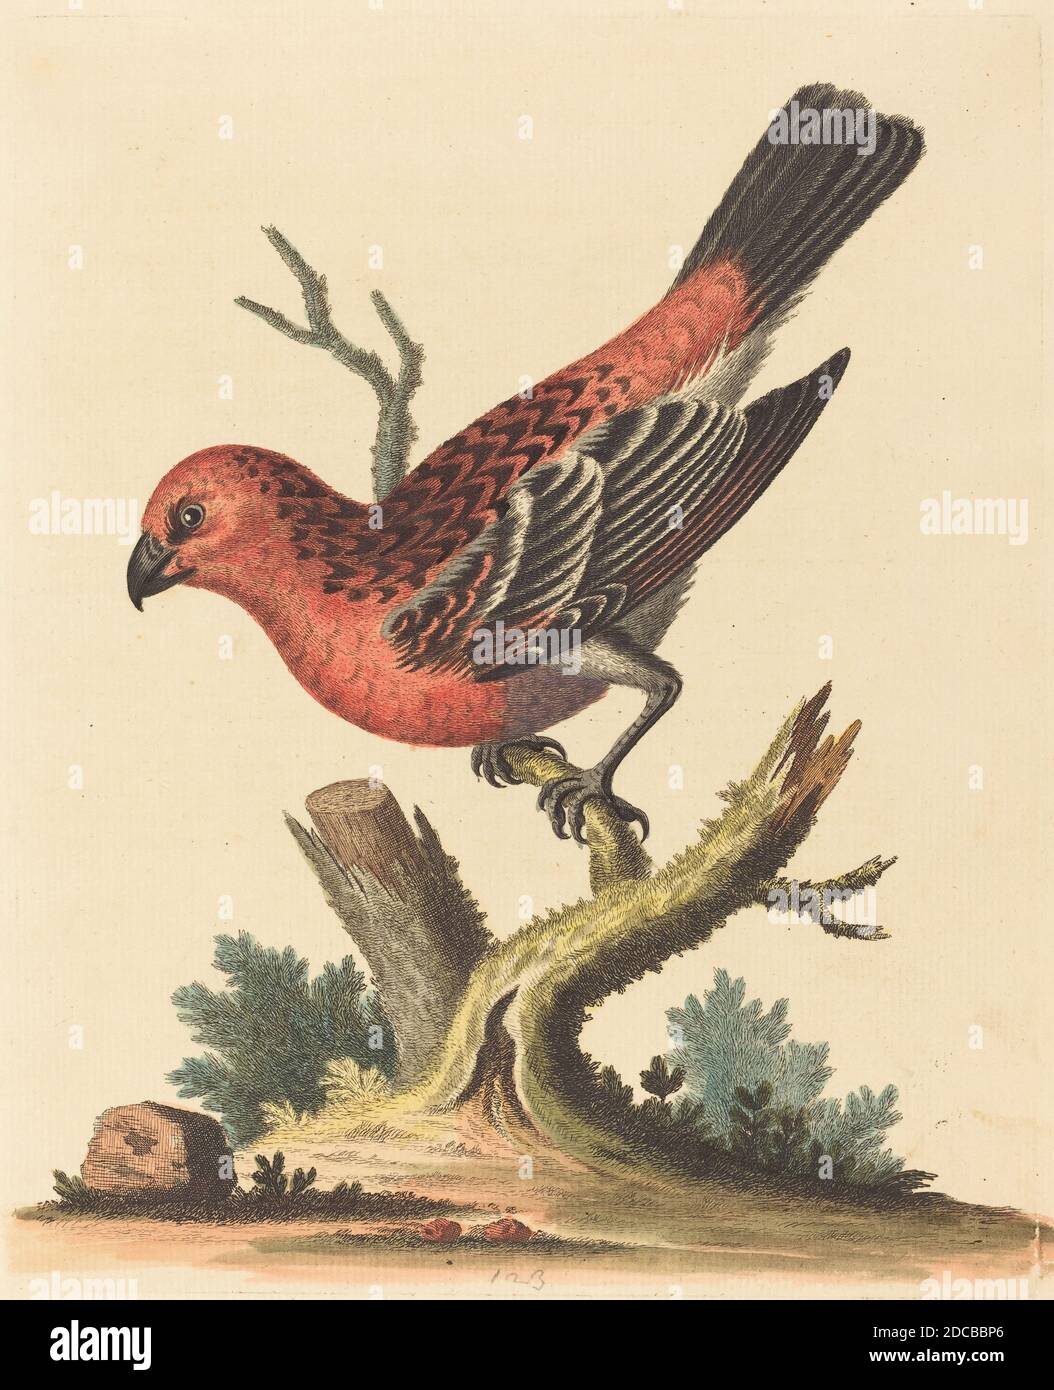 George Edwards, (artist), English, 1694 - 1773, Red and Black Bird, A Natural History of Uncommon Birds and Animals (1743-51), (series), hand-colored etching on laid paper, plate: 23.5 x 18.9 cm (9 1/4 x 7 7/16 in.), sheet: 27.9 x 21.6 cm (11 x 8 1/2 in Stock Photo